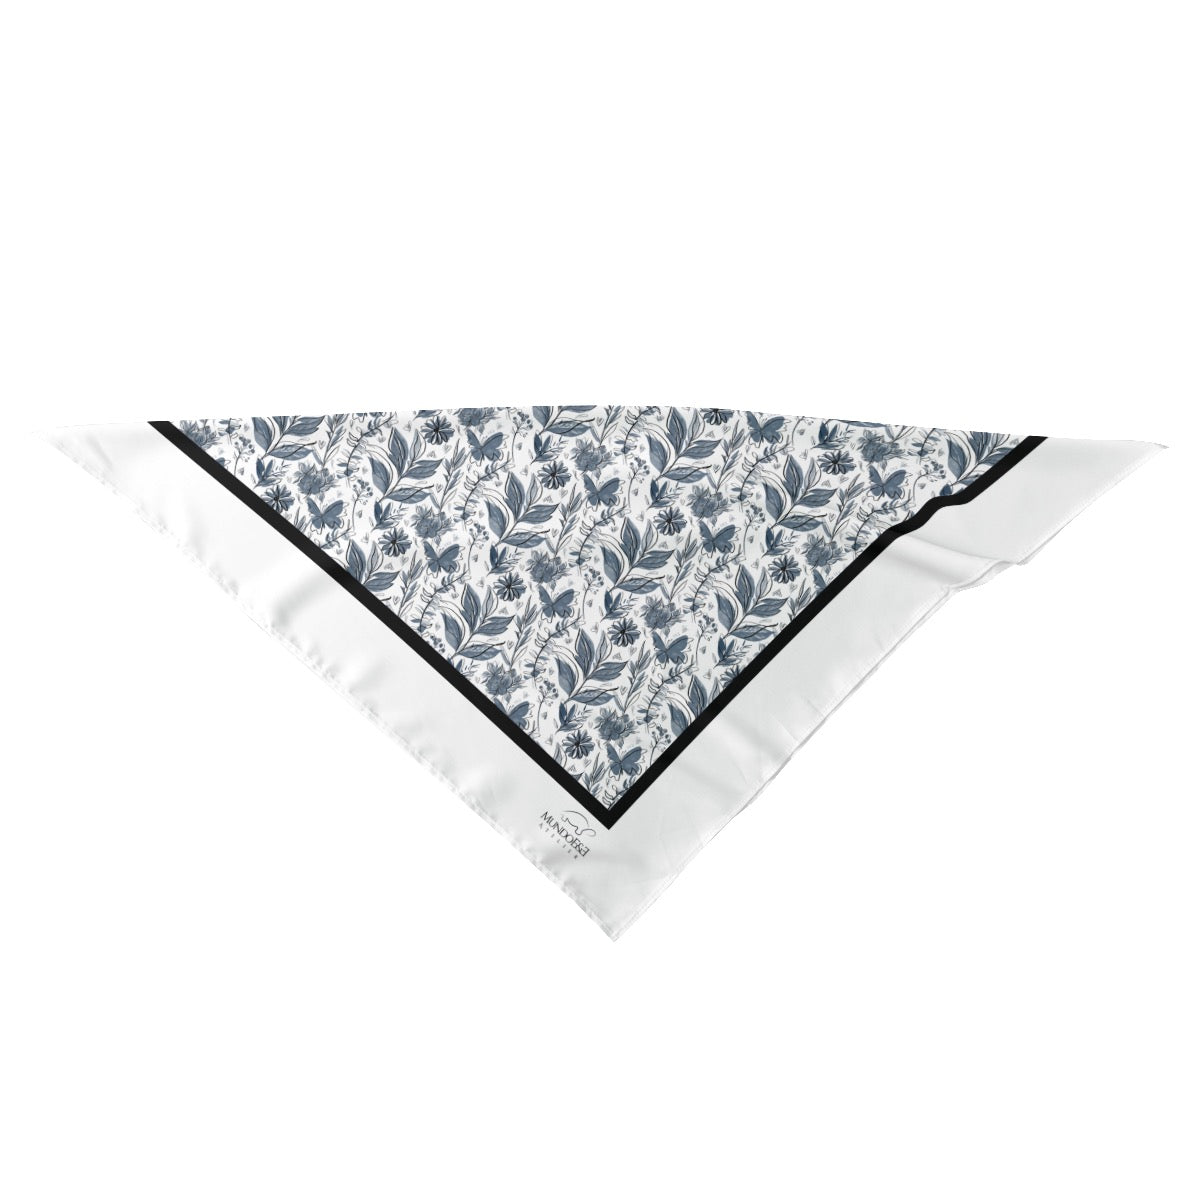 Watercolor White and Blue Silk Scarf. Houston Collection. Design hand-painted by the Designer Maria